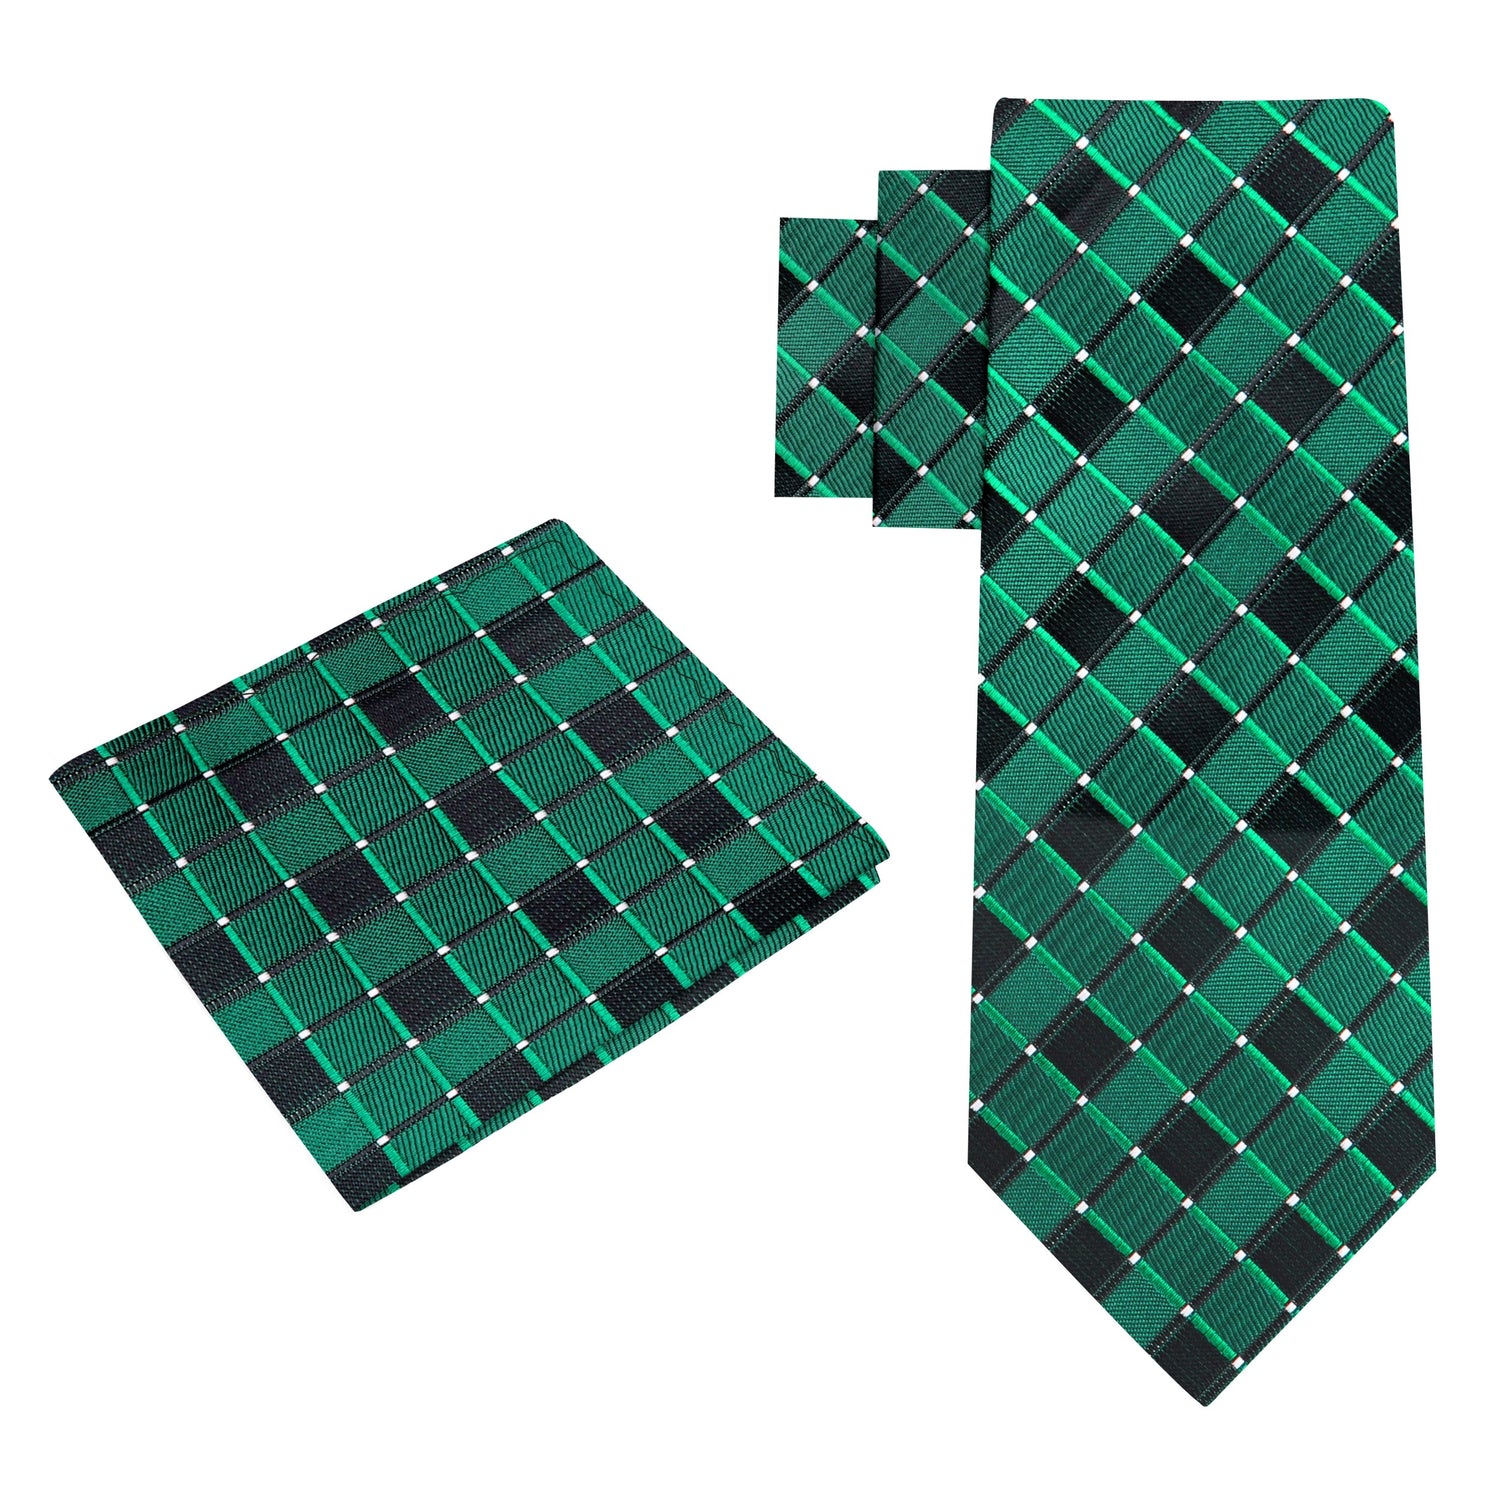 Alt View: Green Geometric Necktie and Accenting Blue, White, Yellow and Green Stripe Square